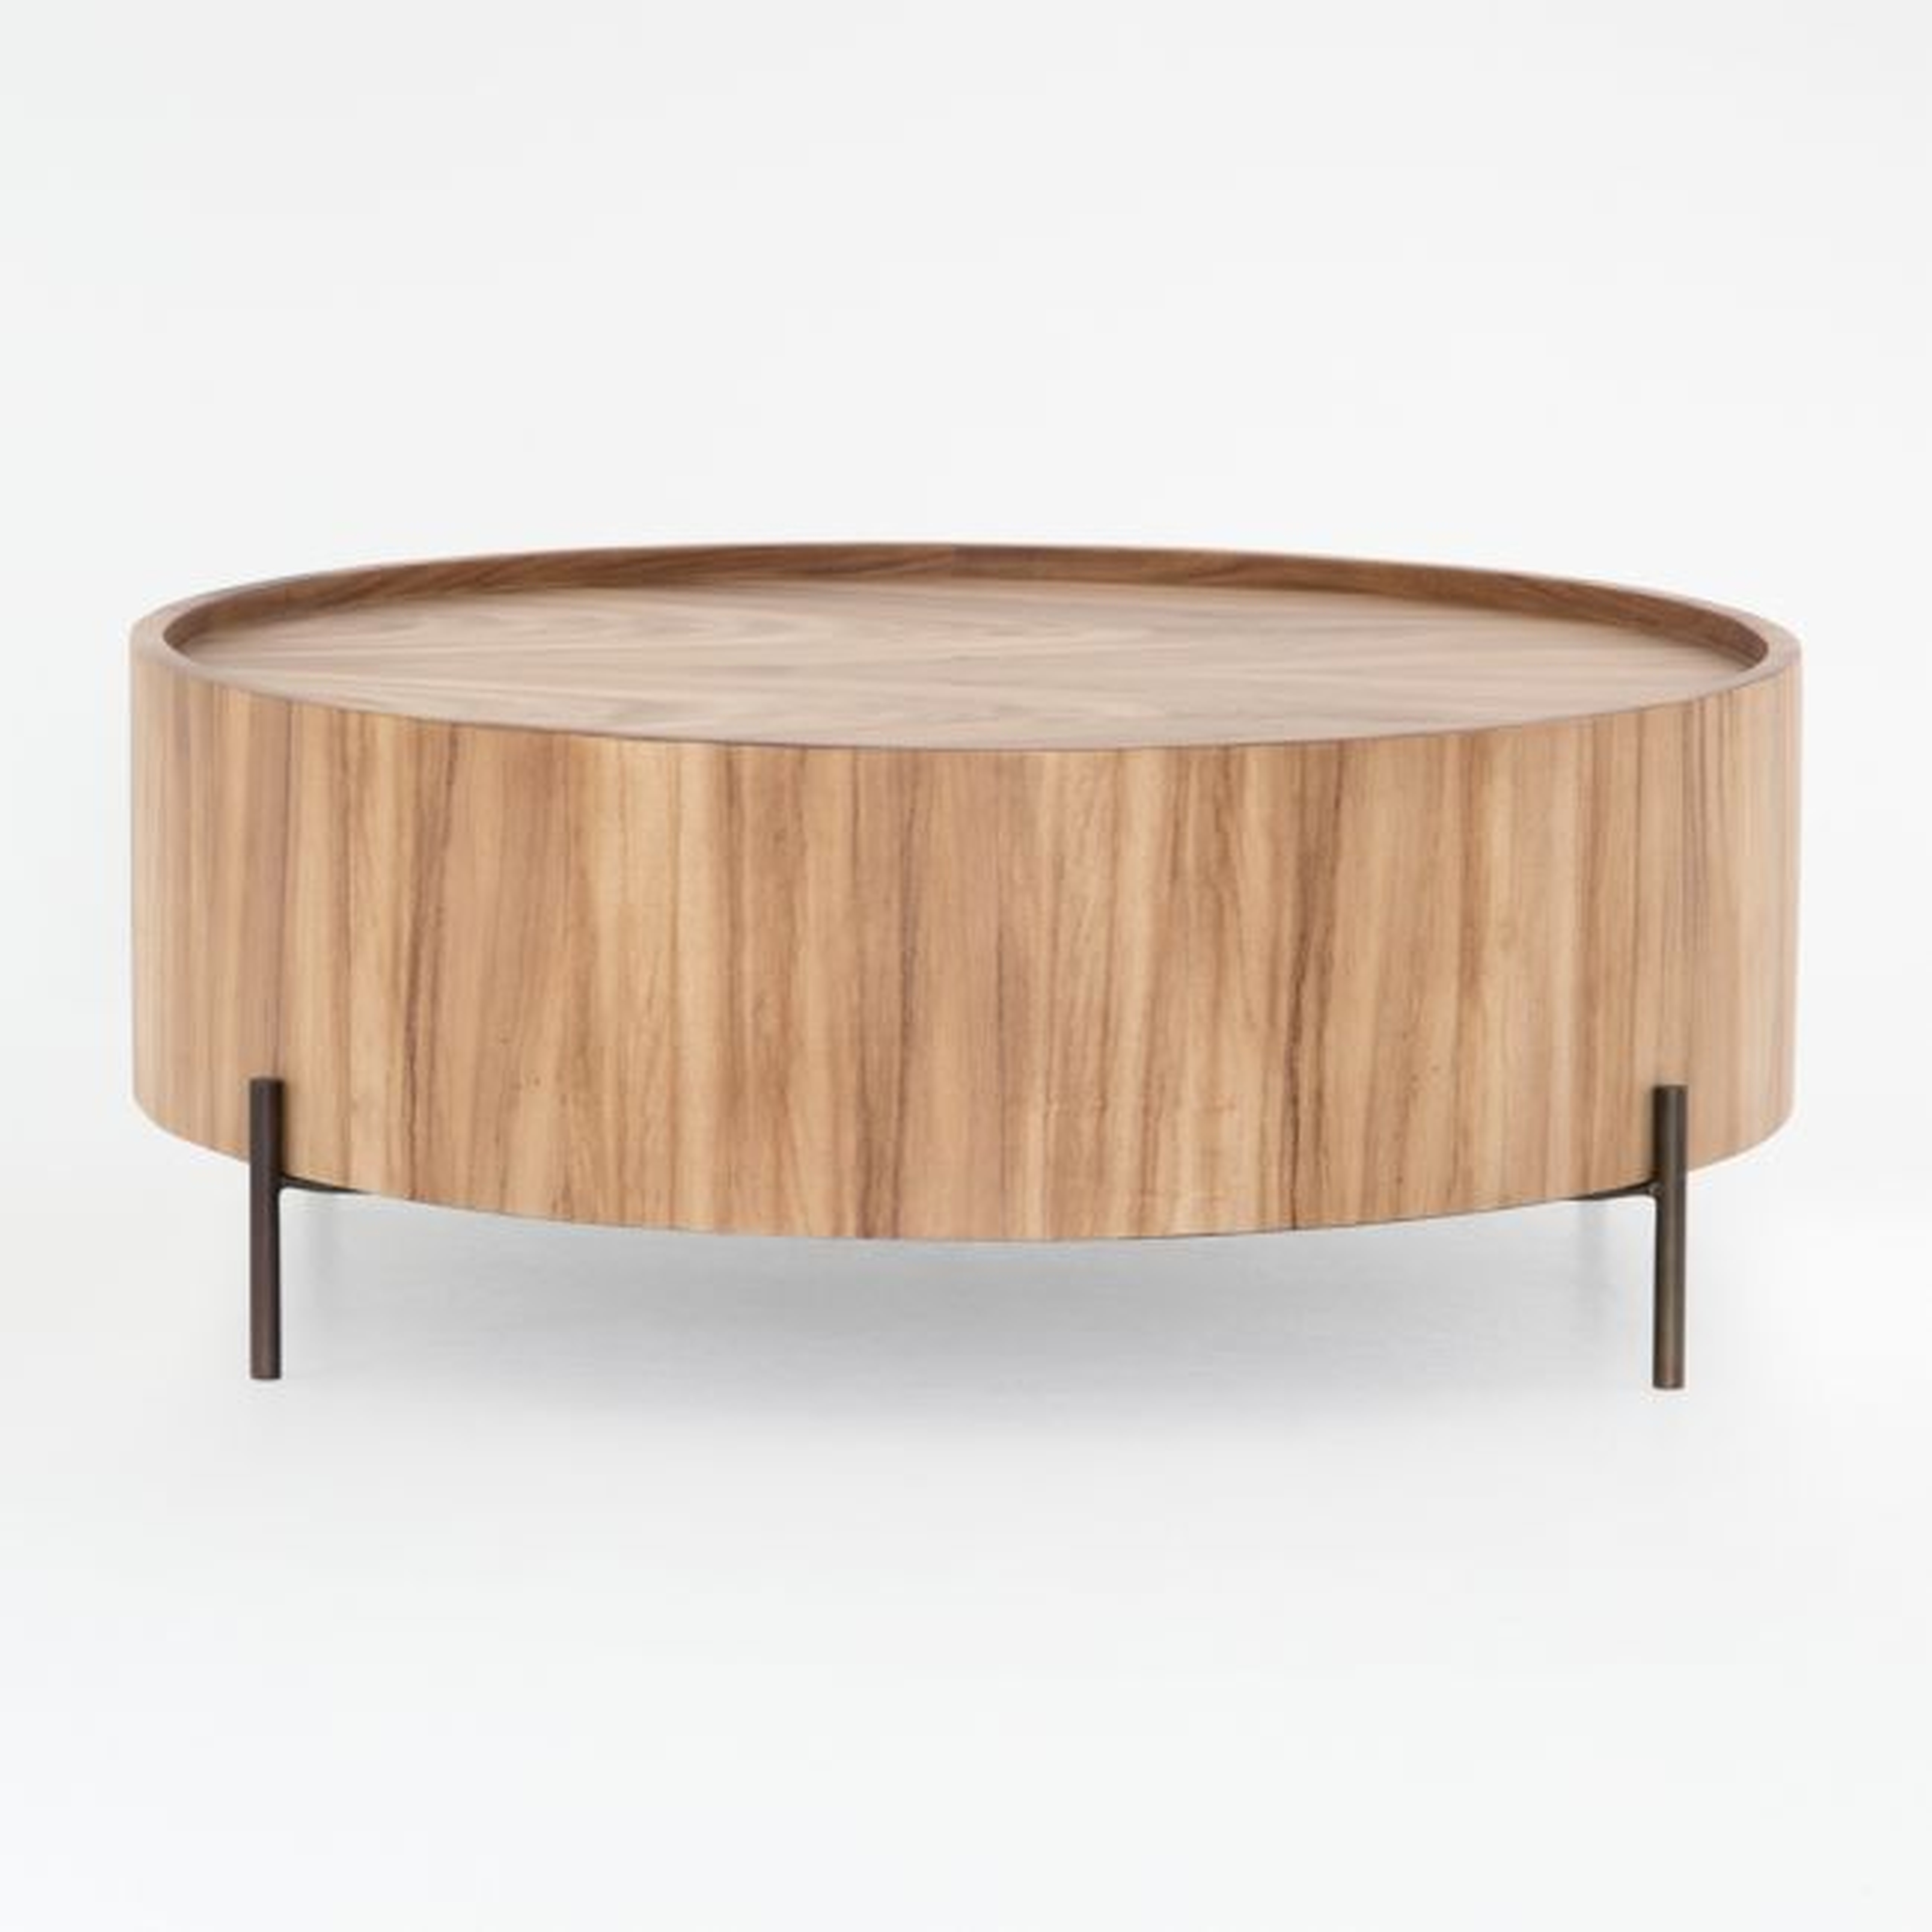 Luke Drum Table - Crate and Barrel